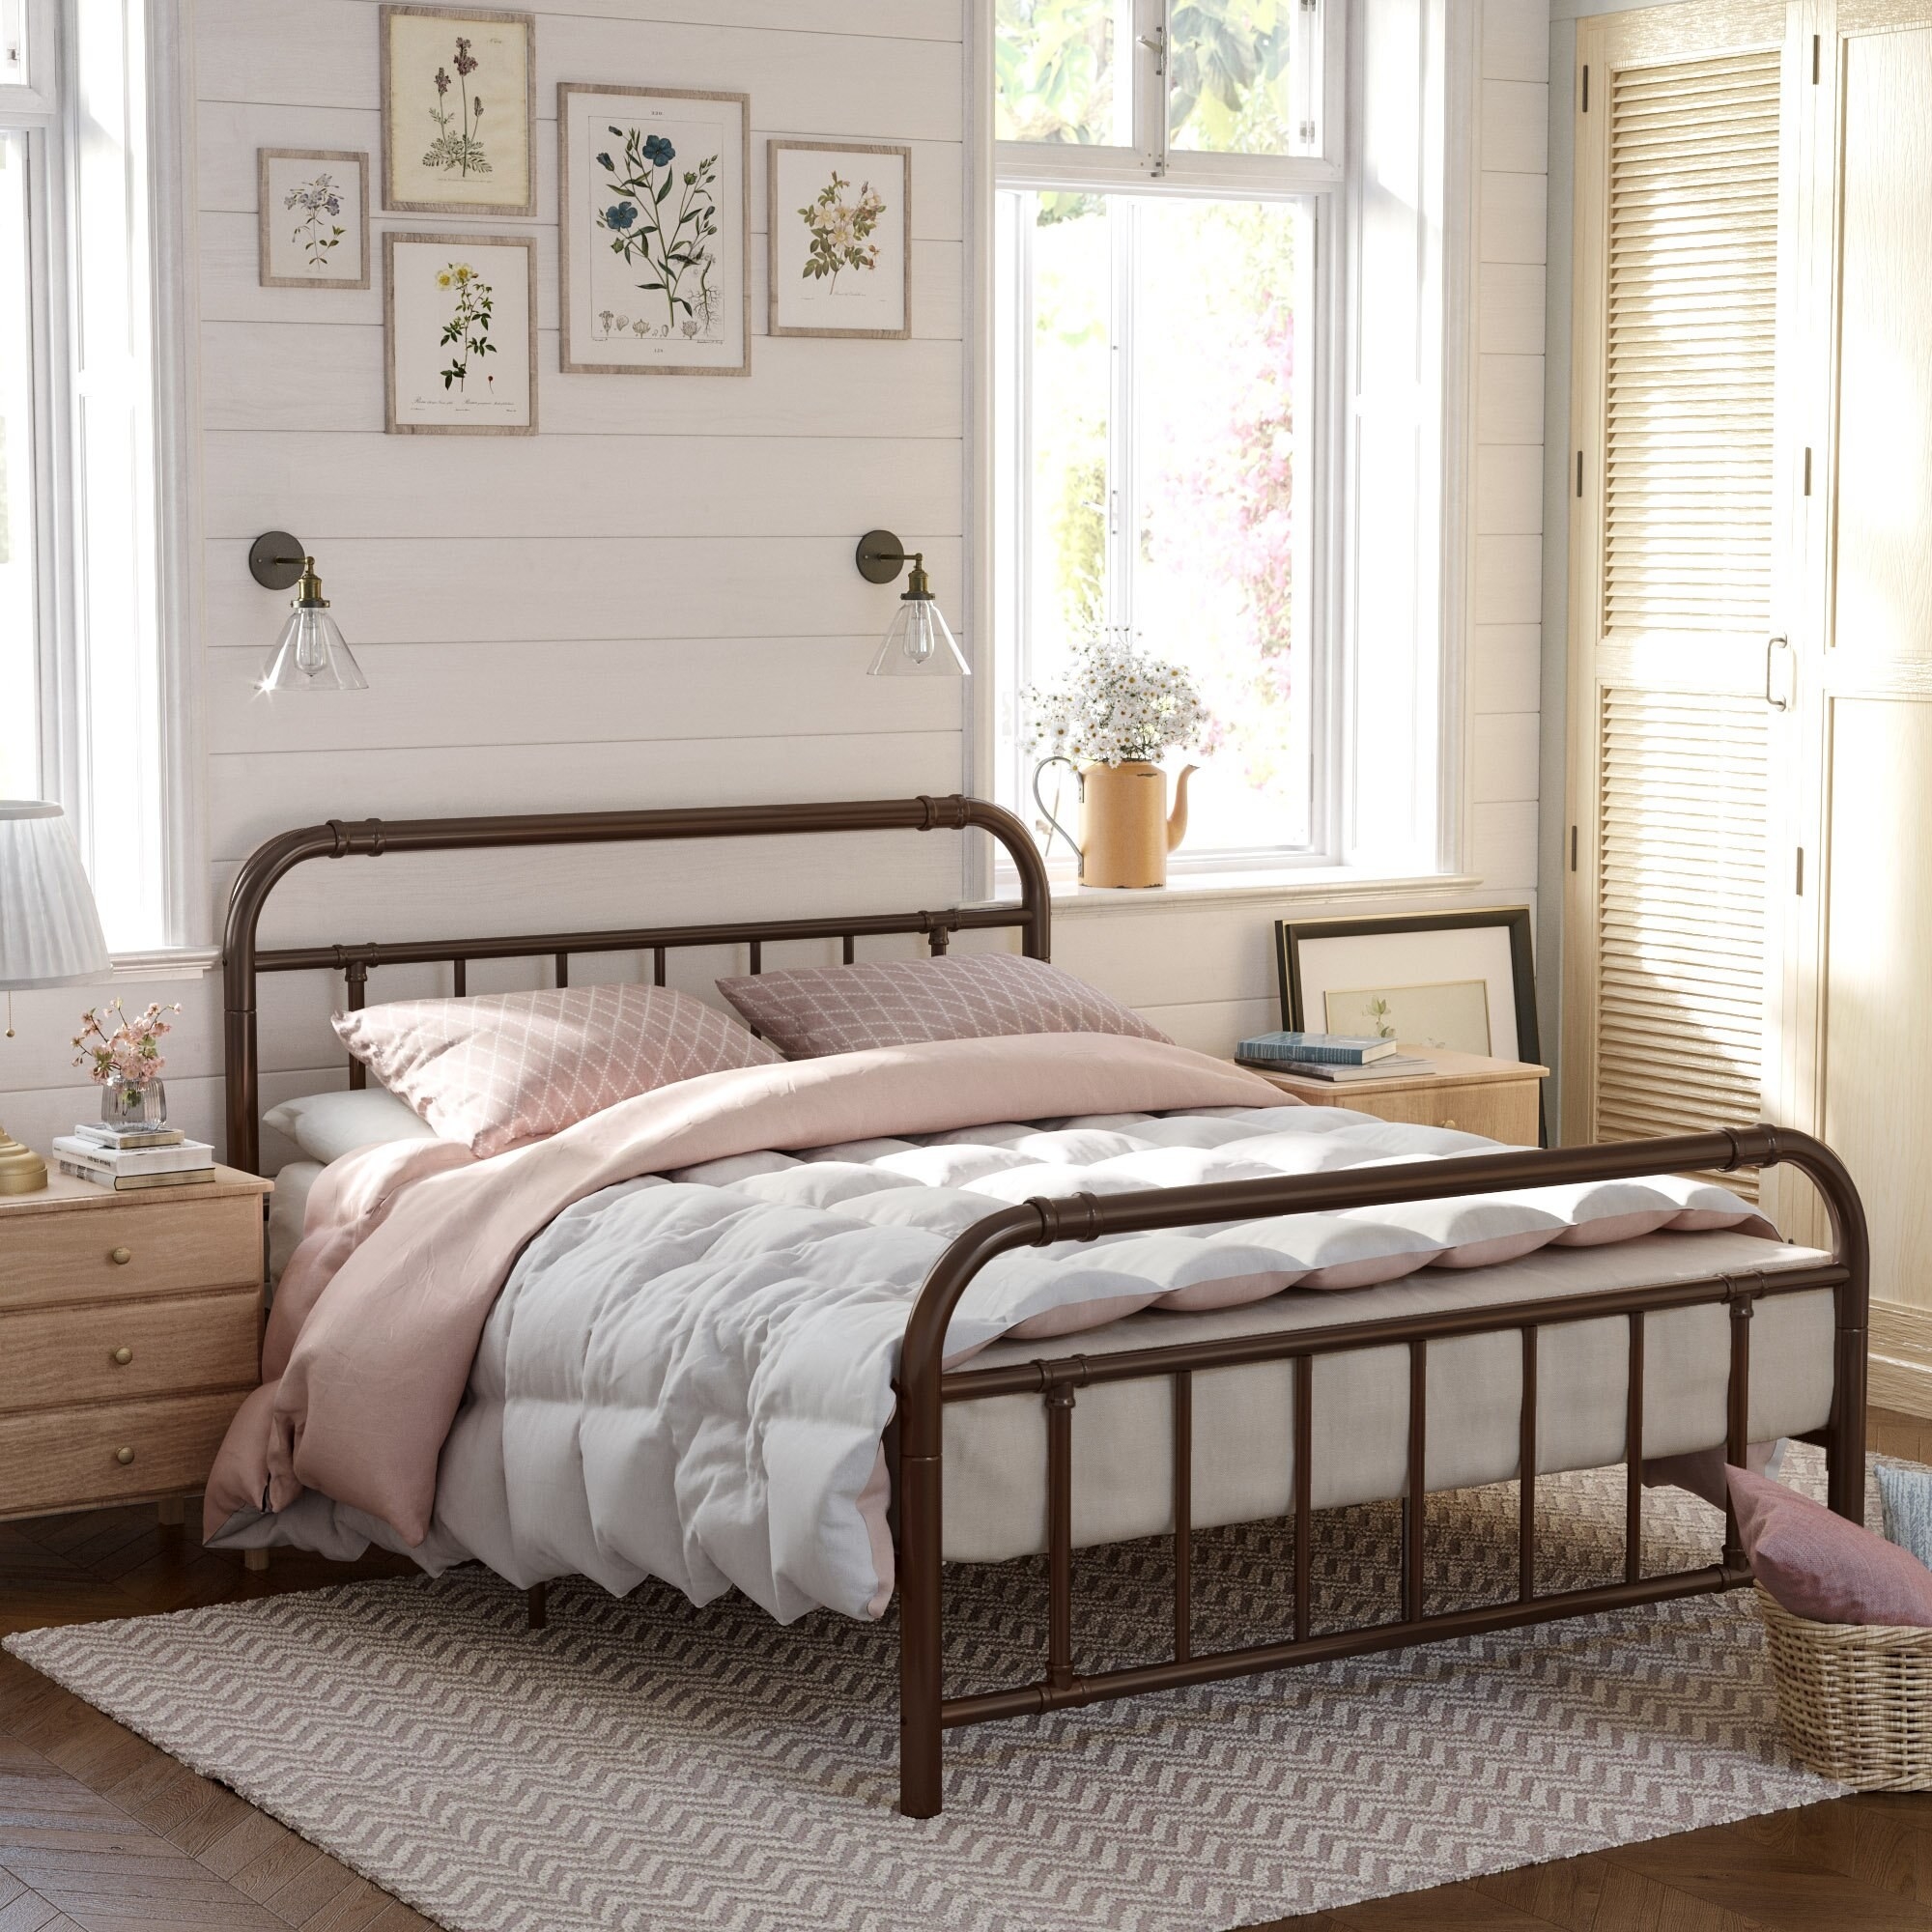 27 Bed Frames That Only Look, Cute Full Size Bed Frames